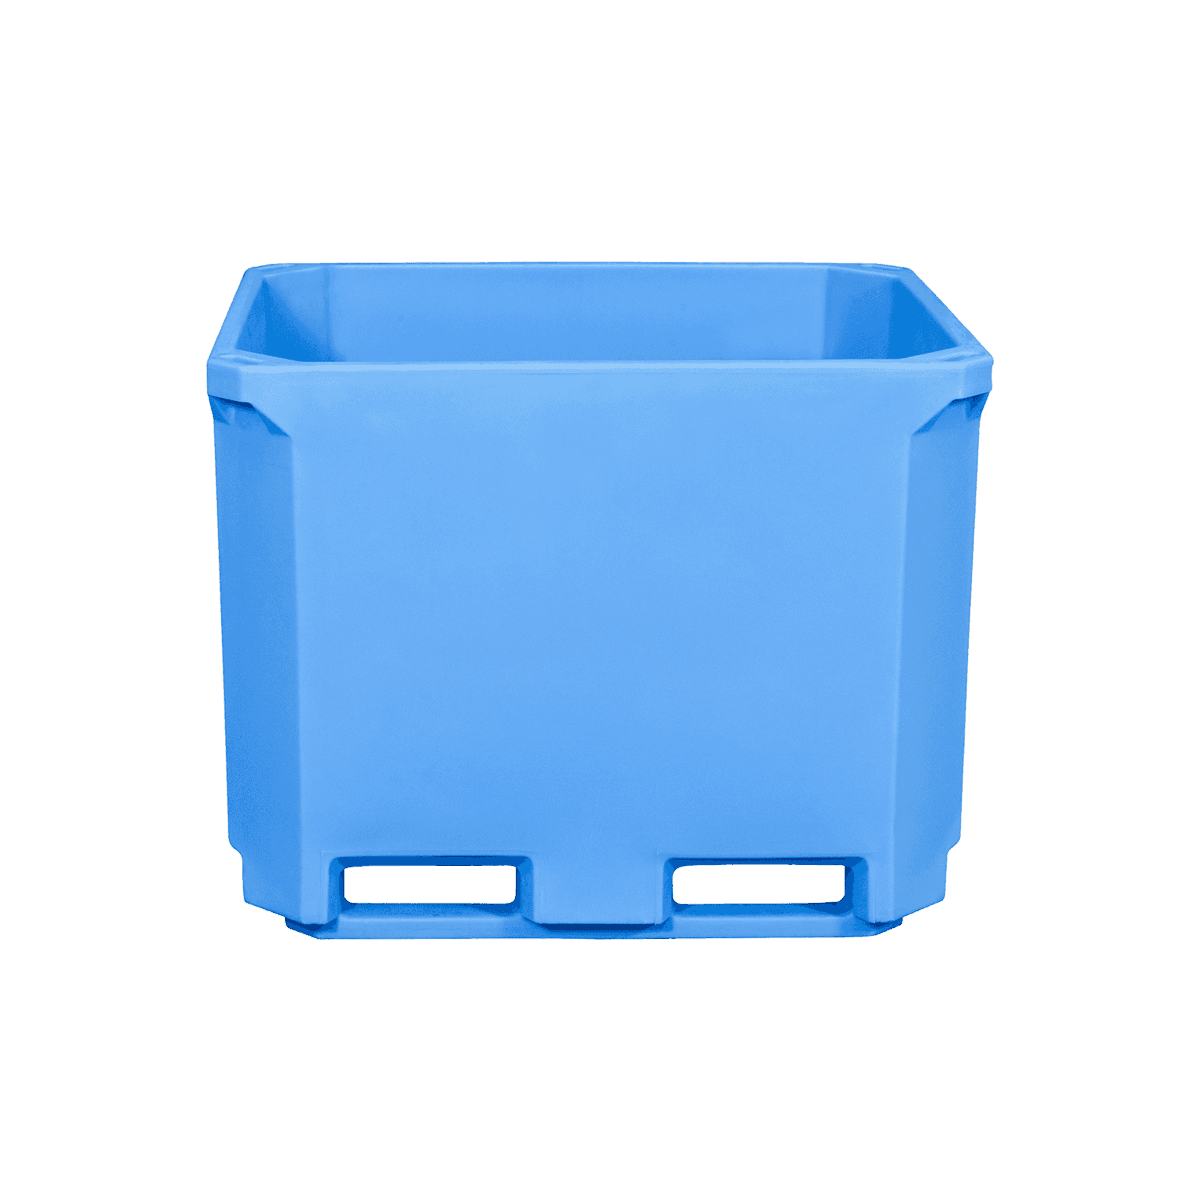 What Is The Product Structure Of Ibc Of Composite Medium Bulk Container?